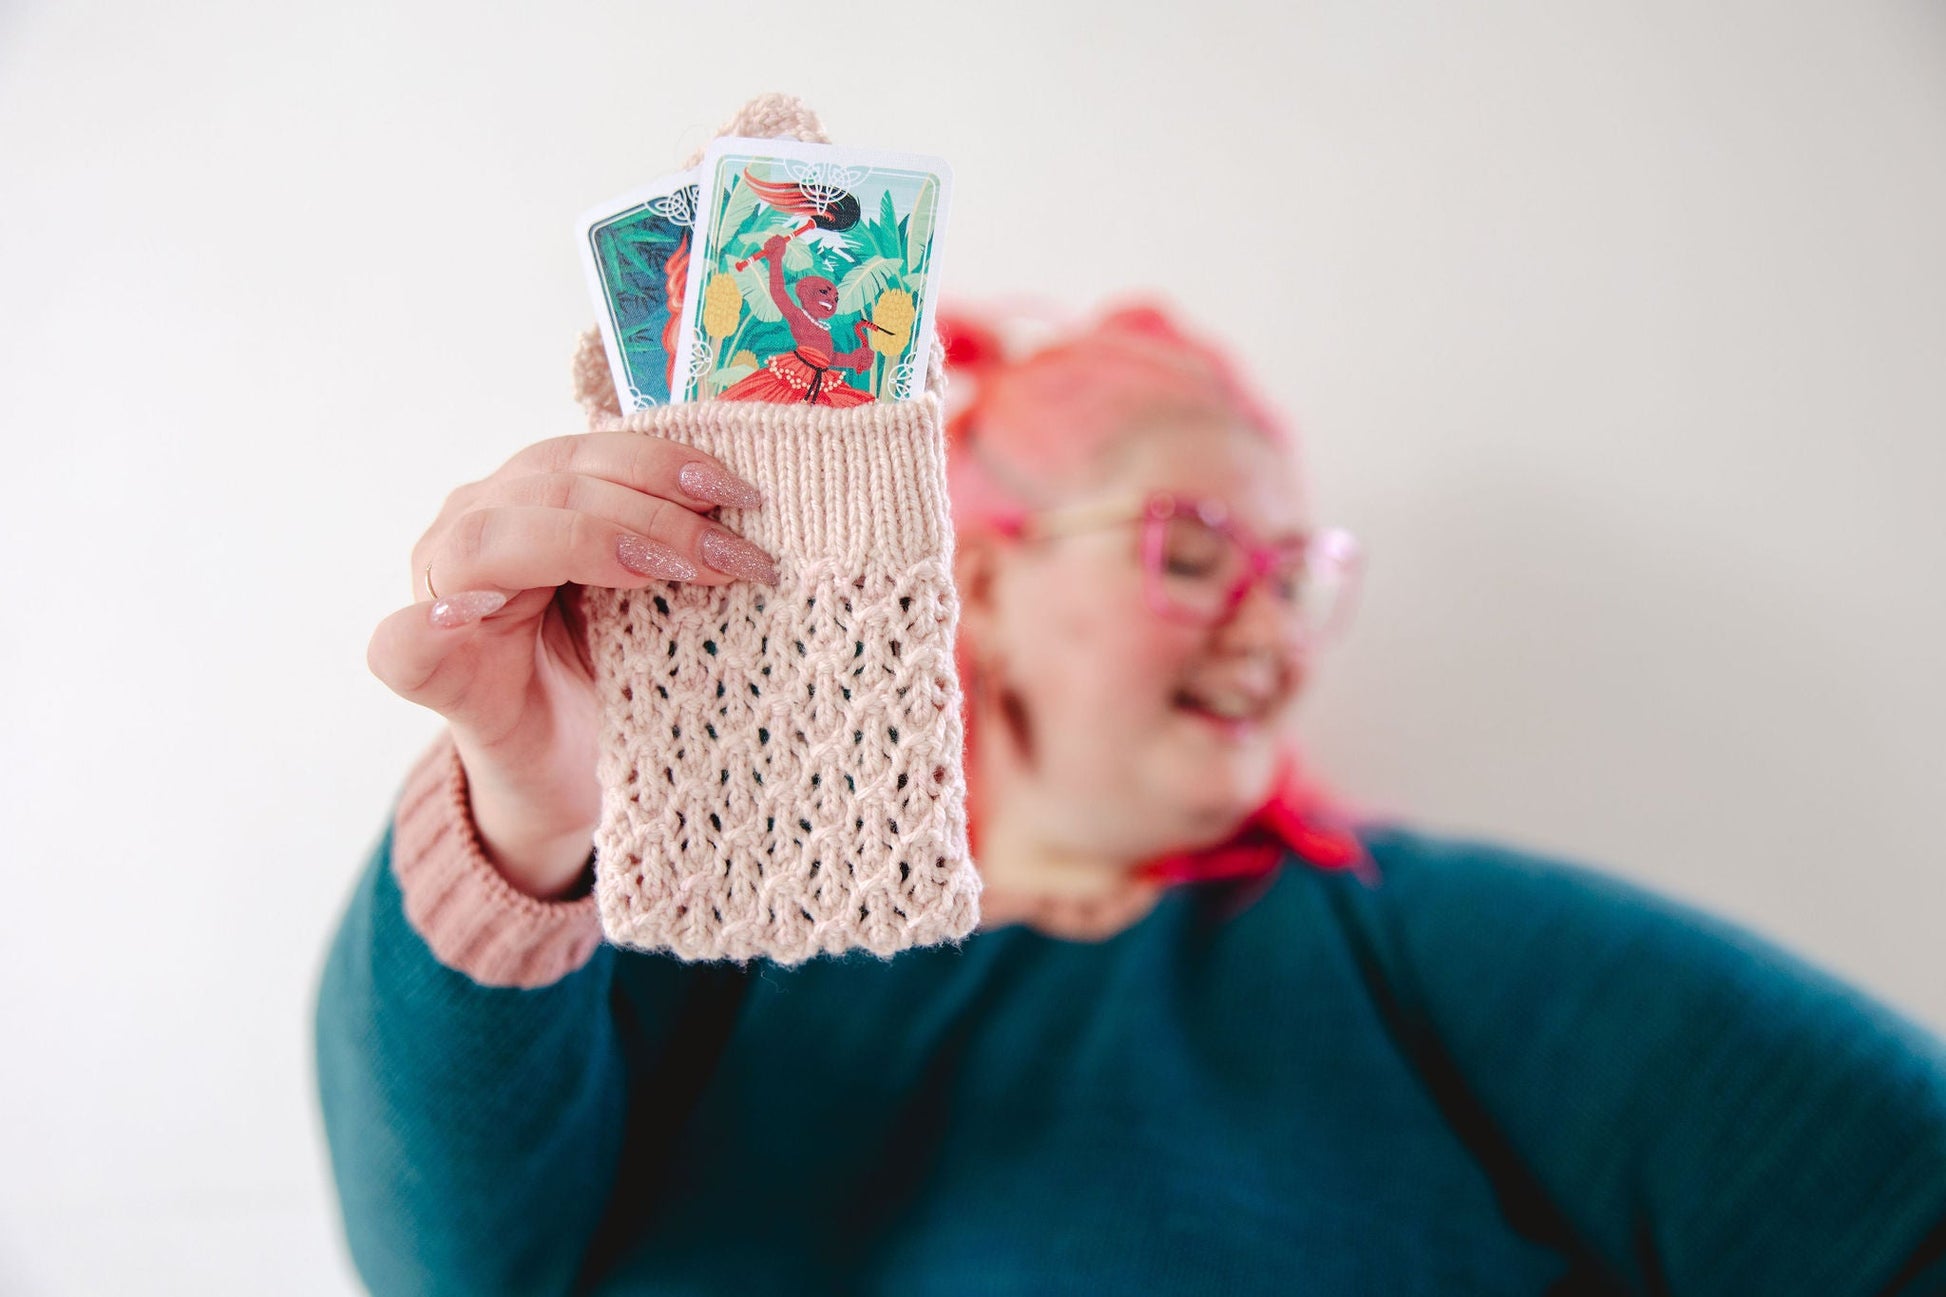 Courtney, who has pink hair, holds a cream colored lace knit pouch, the Mary Tarot Pouch. The pouch holds two brightly colored tarot cards.